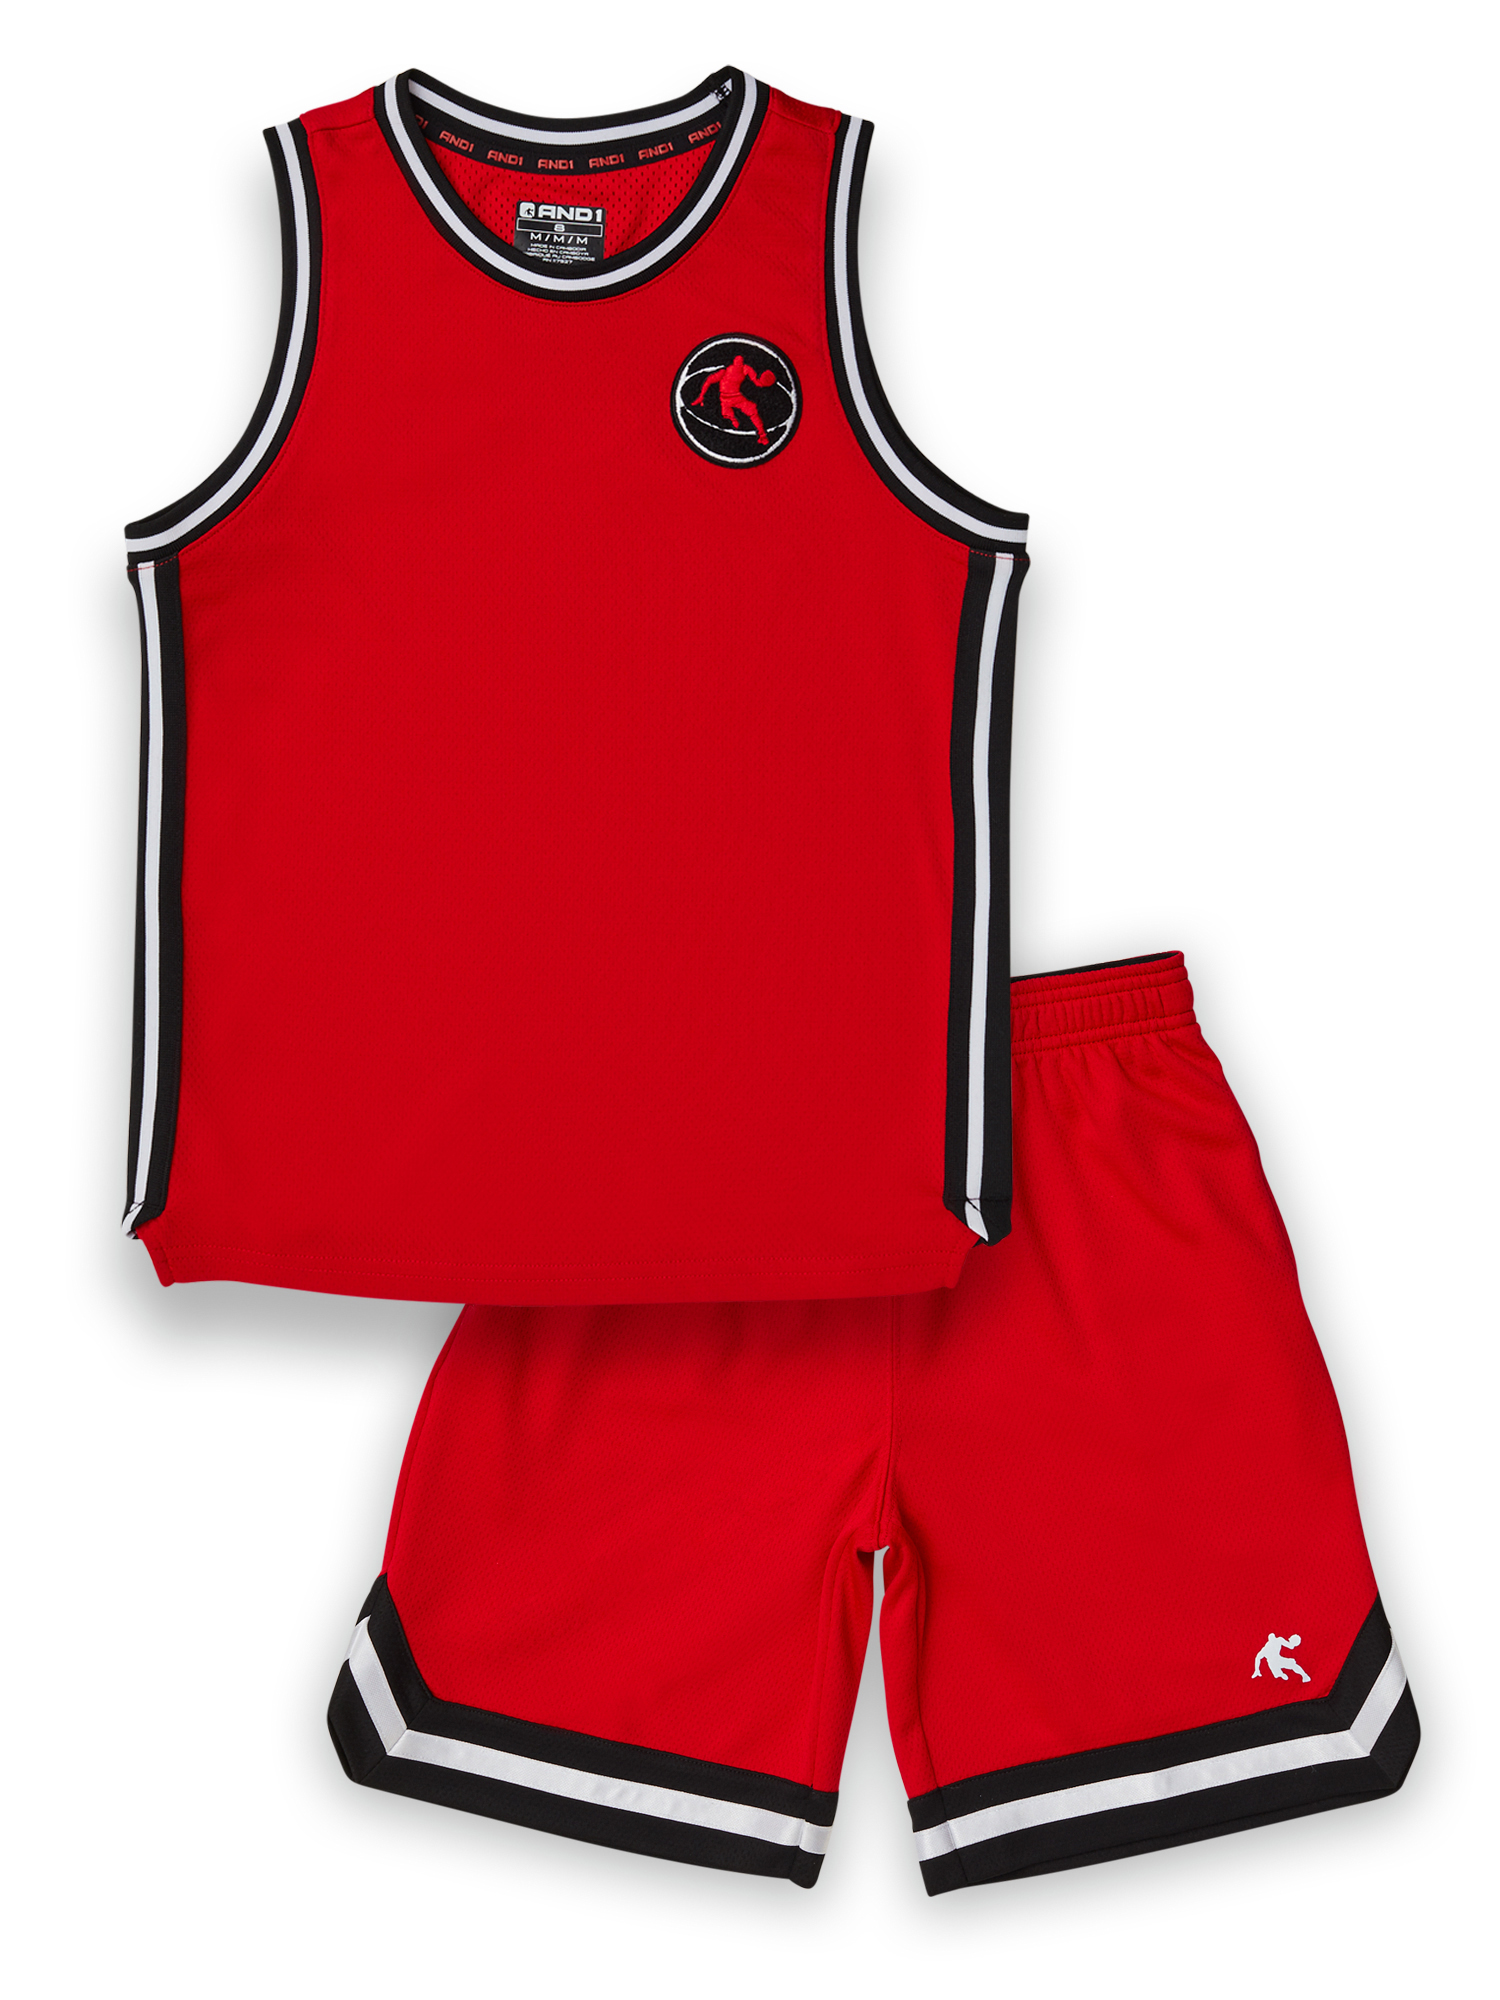 AND1 Boys Jersey Tank & Basketball Shorts 2-Piece Outfit Set, Sizes 4-18 - image 1 of 5